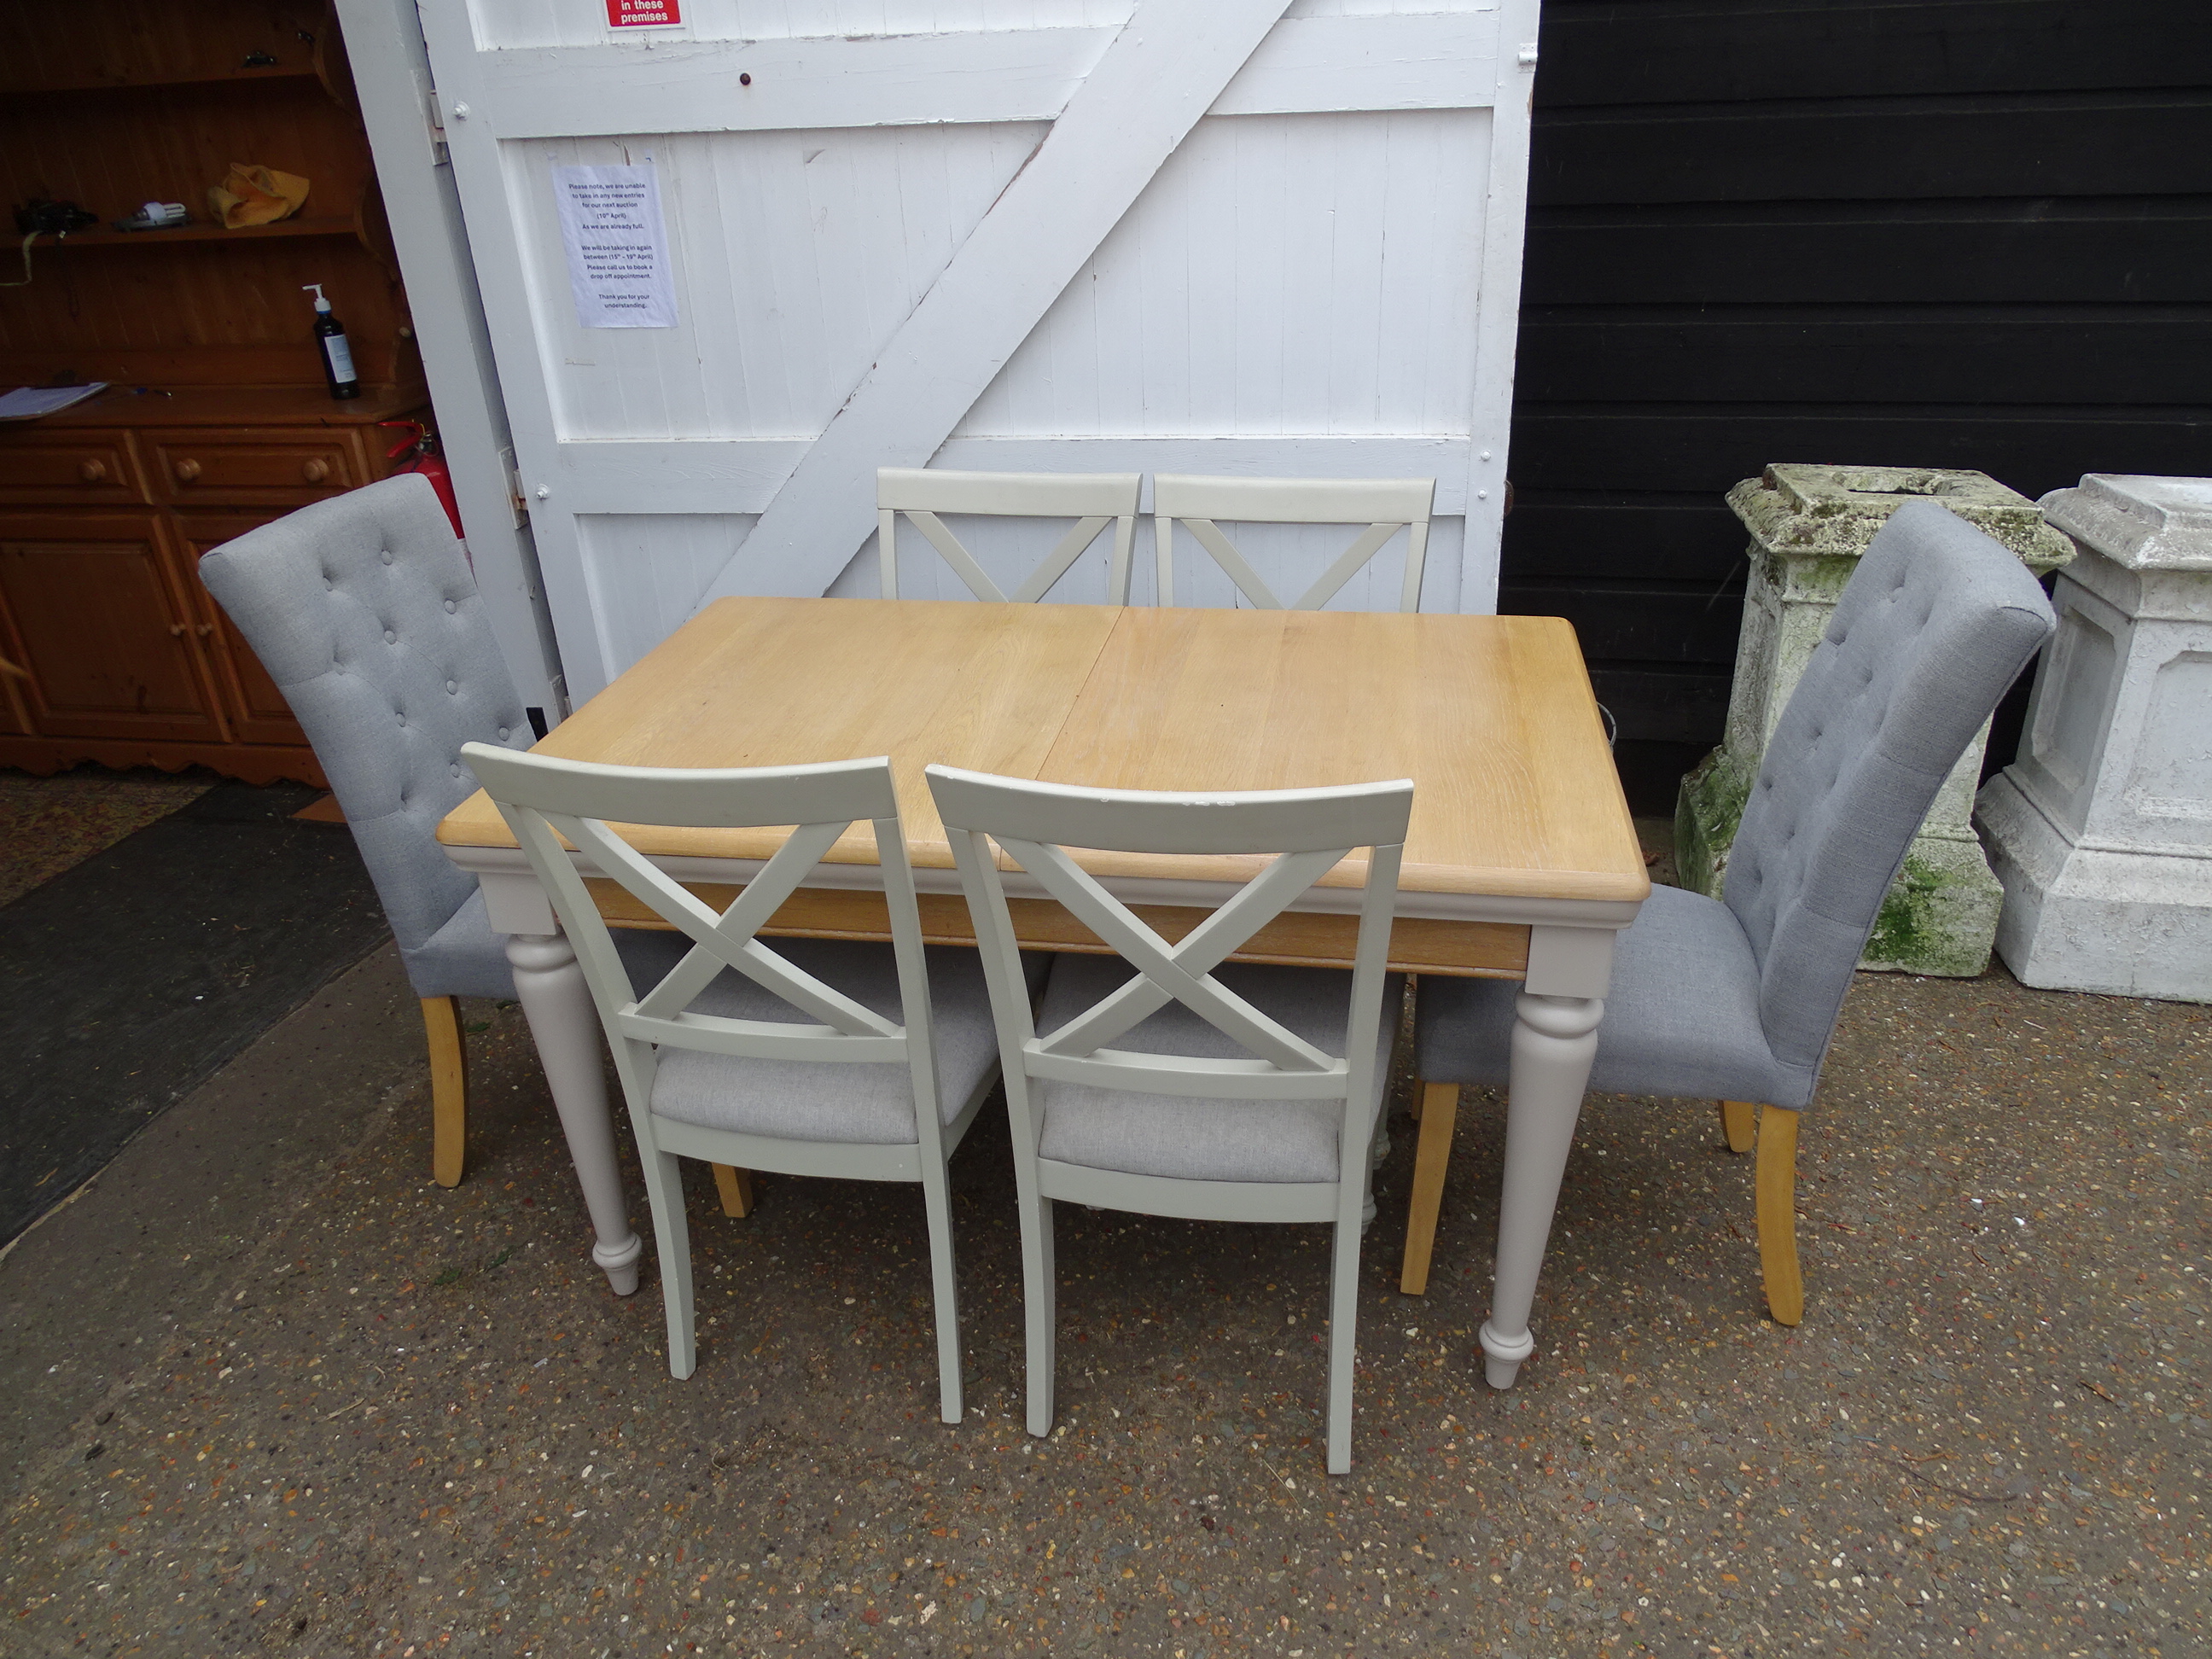 Extending dining table with 6 upholstered chairs